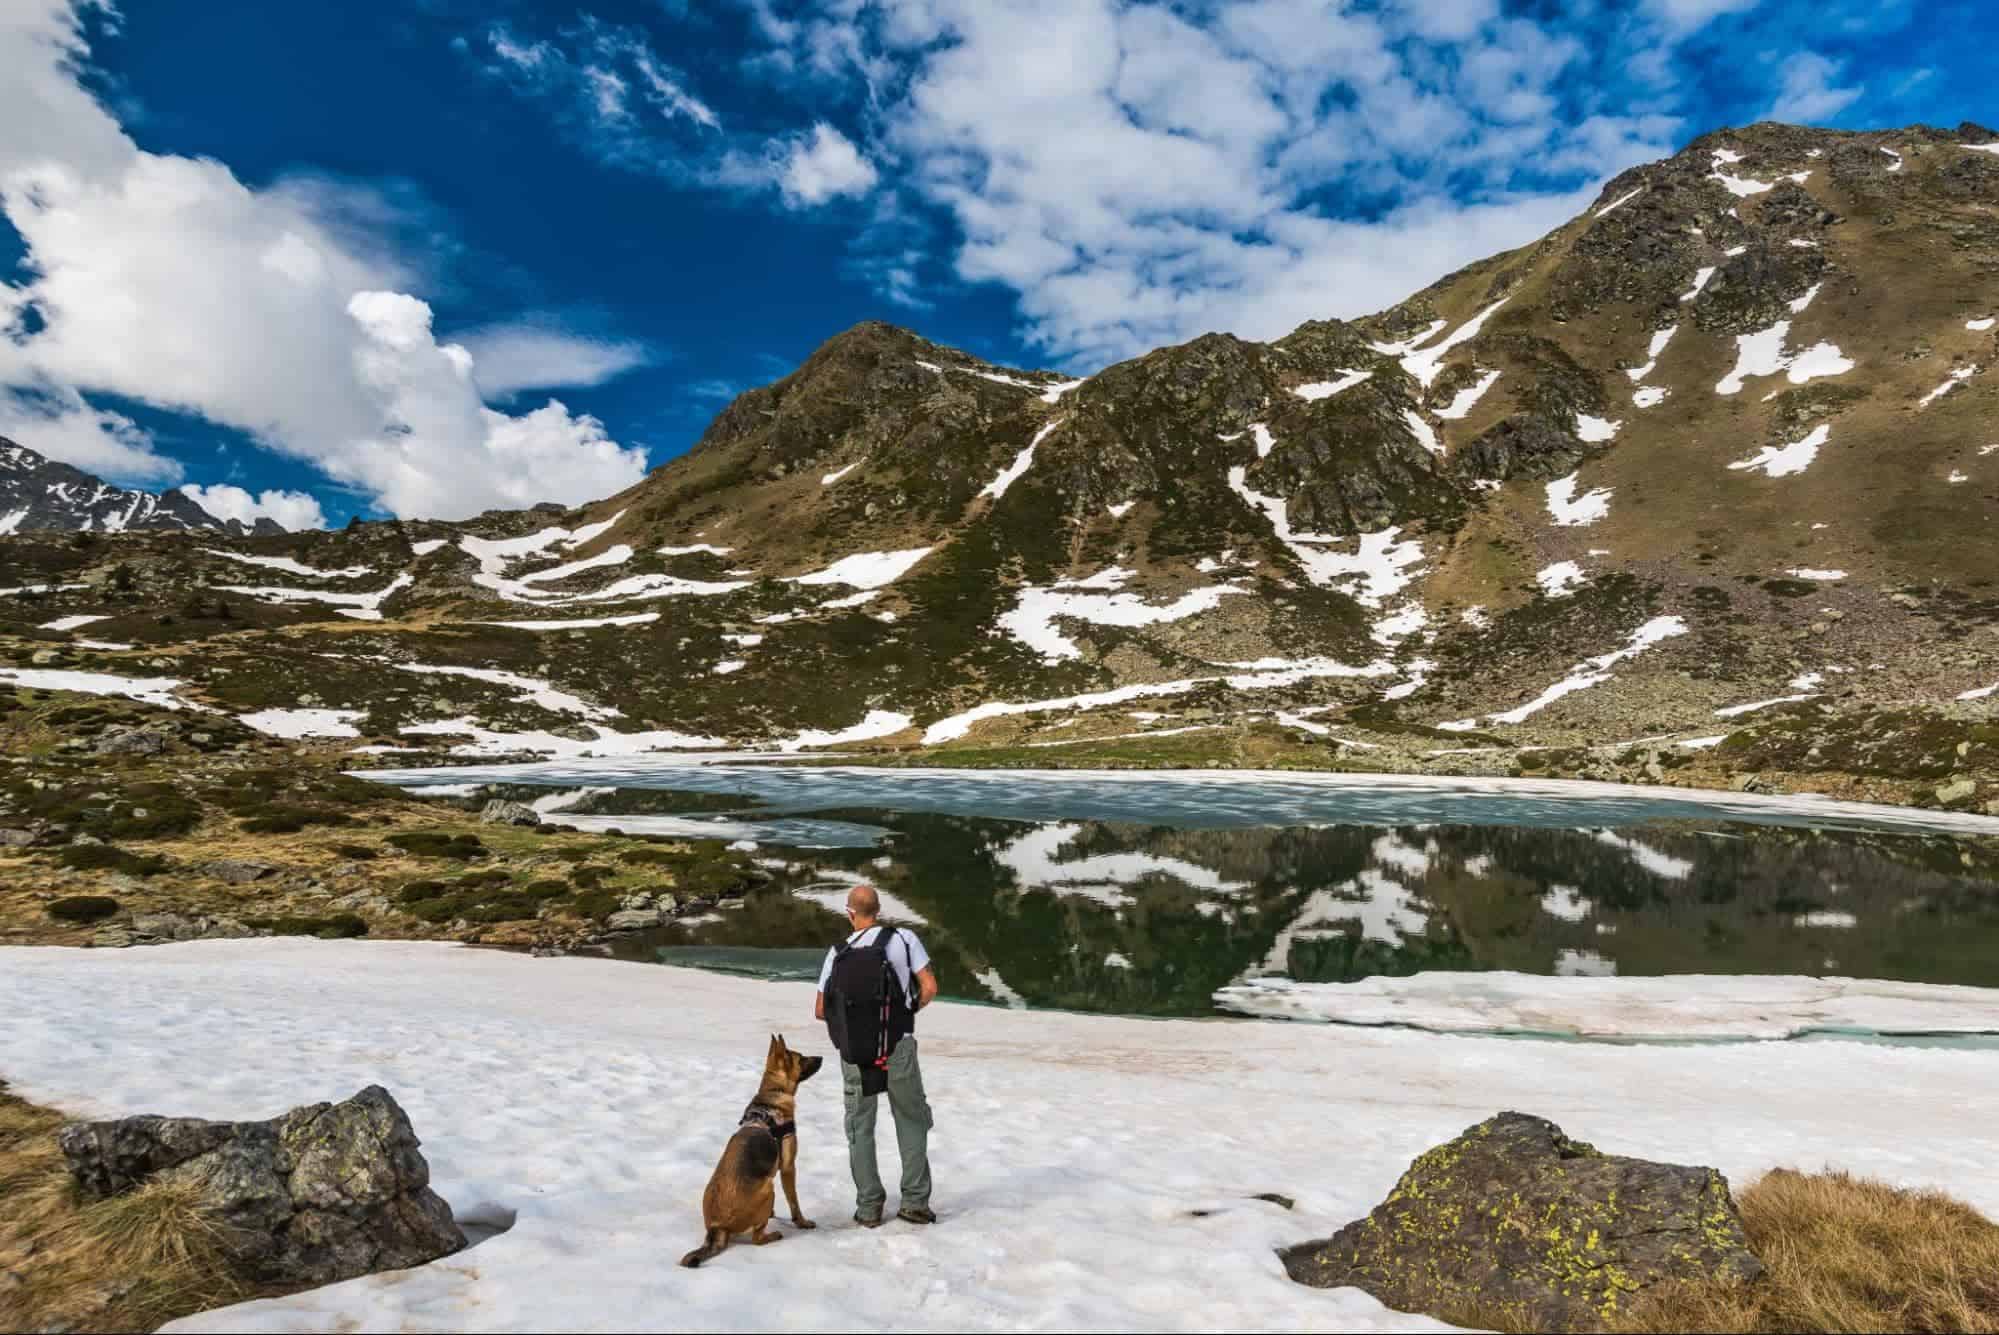 Things You Need To Know Before Hiking with Your Dogs